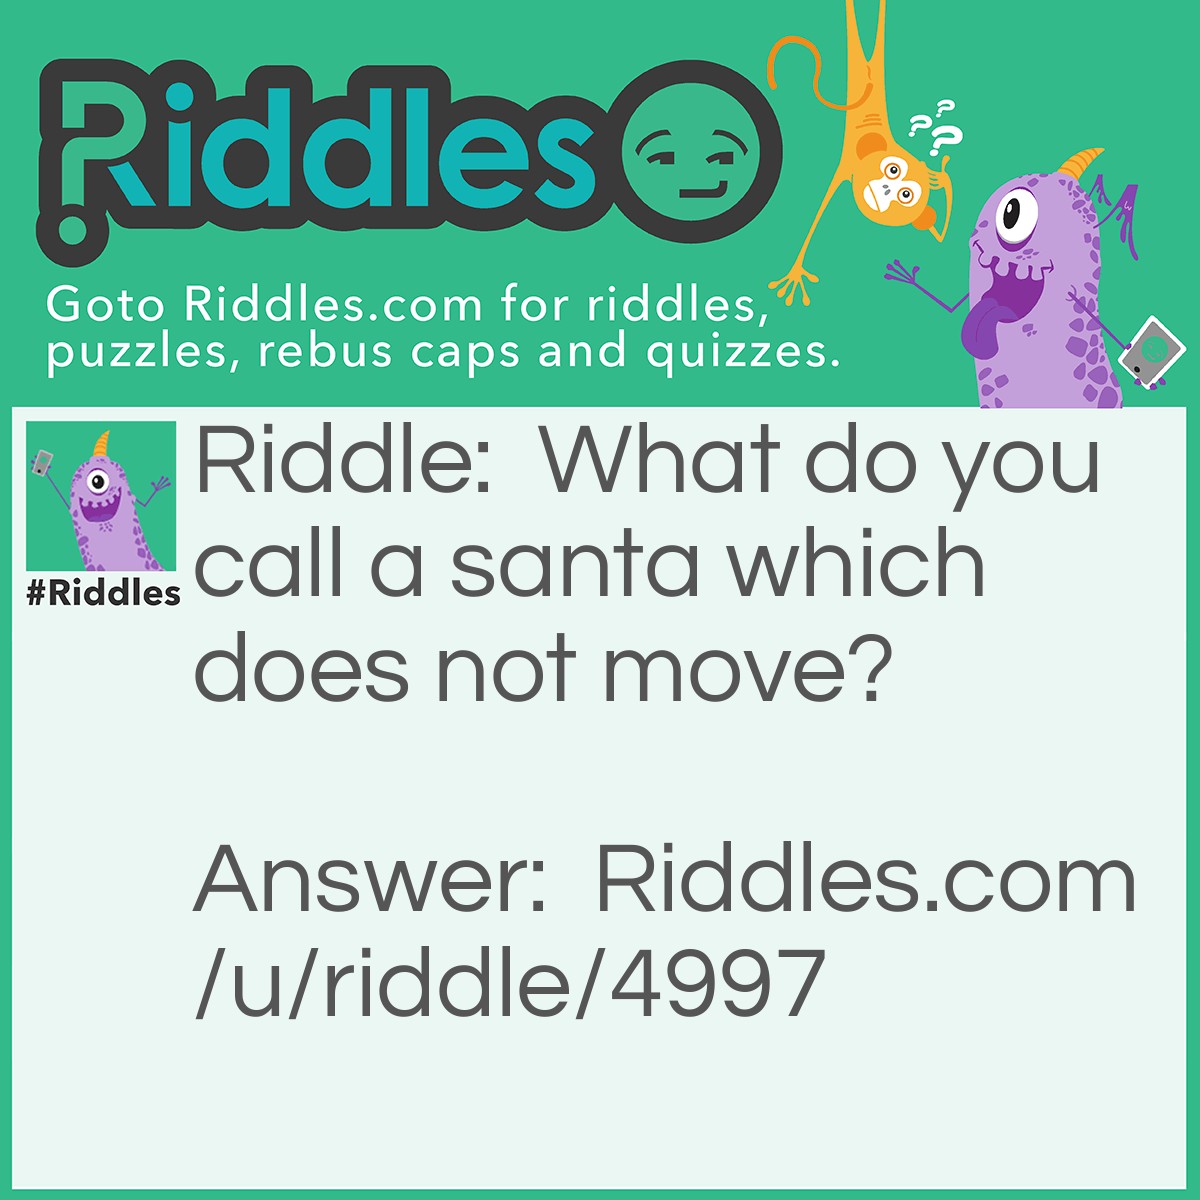 Riddle: What do you call a santa which does not move? Answer: Santa pause.